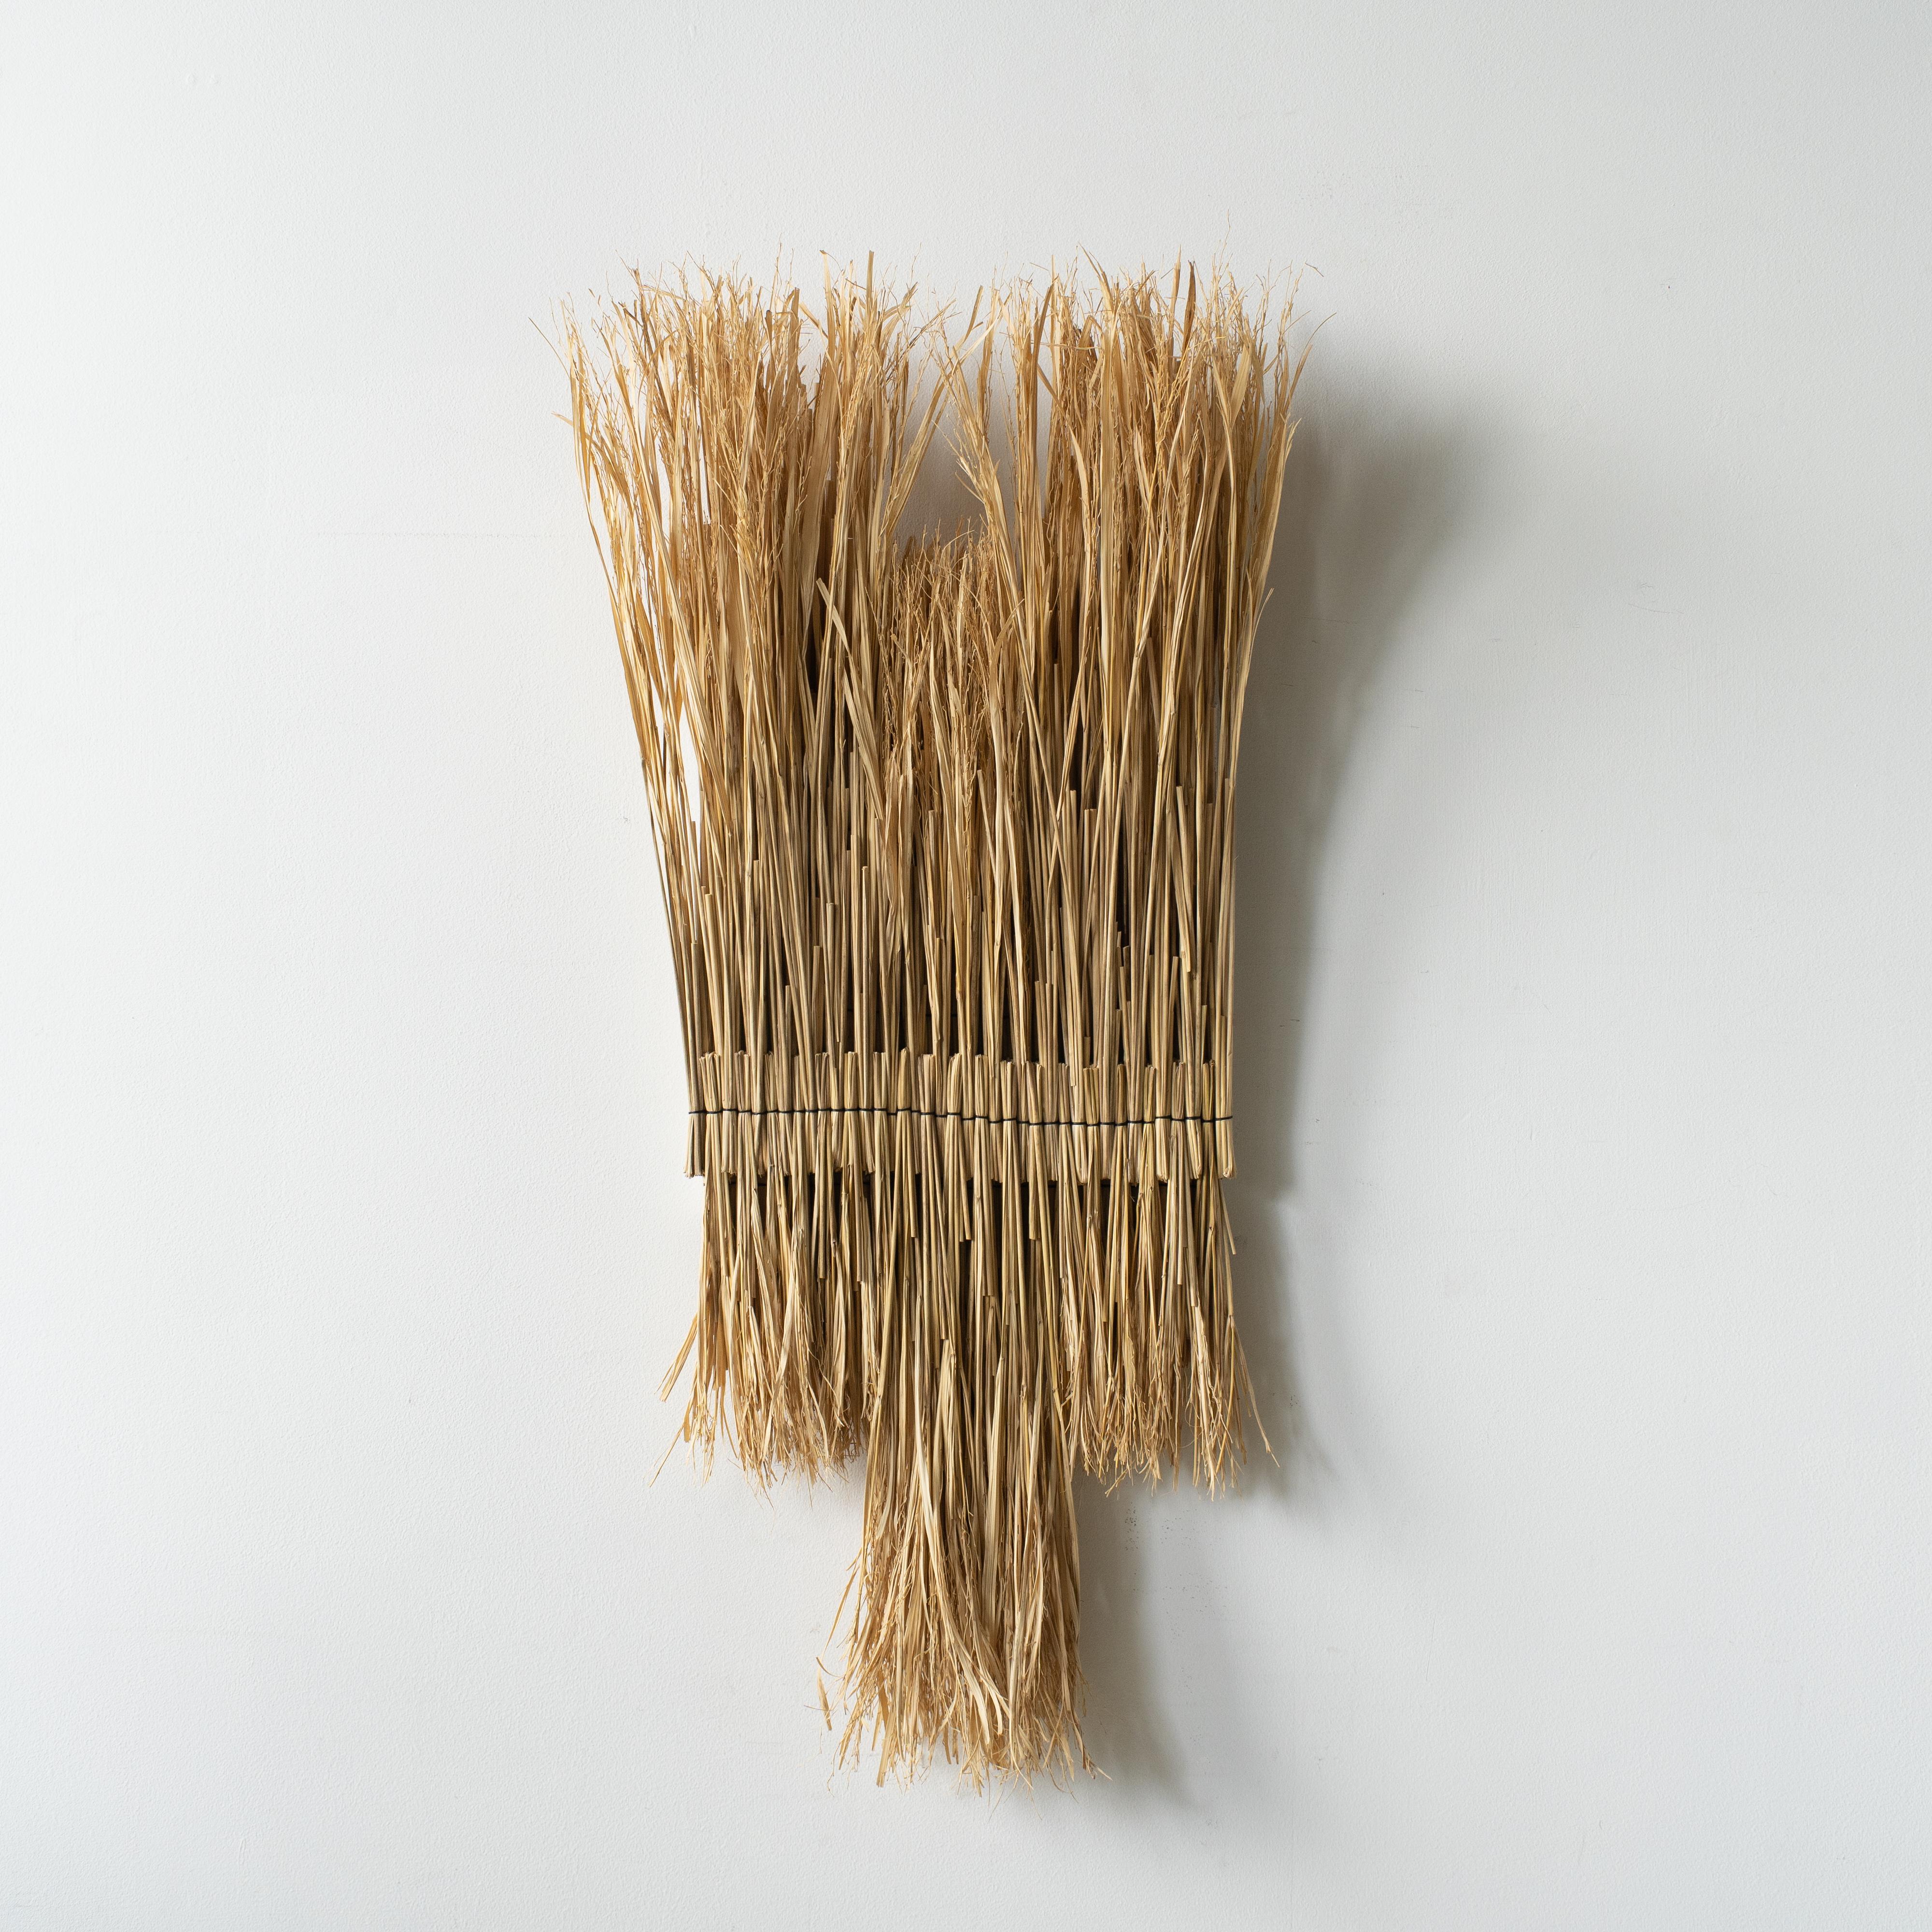 Hand-sewed rice straw art by ARKO. 
Title: Composition Sostenuto
This is one of the series named 